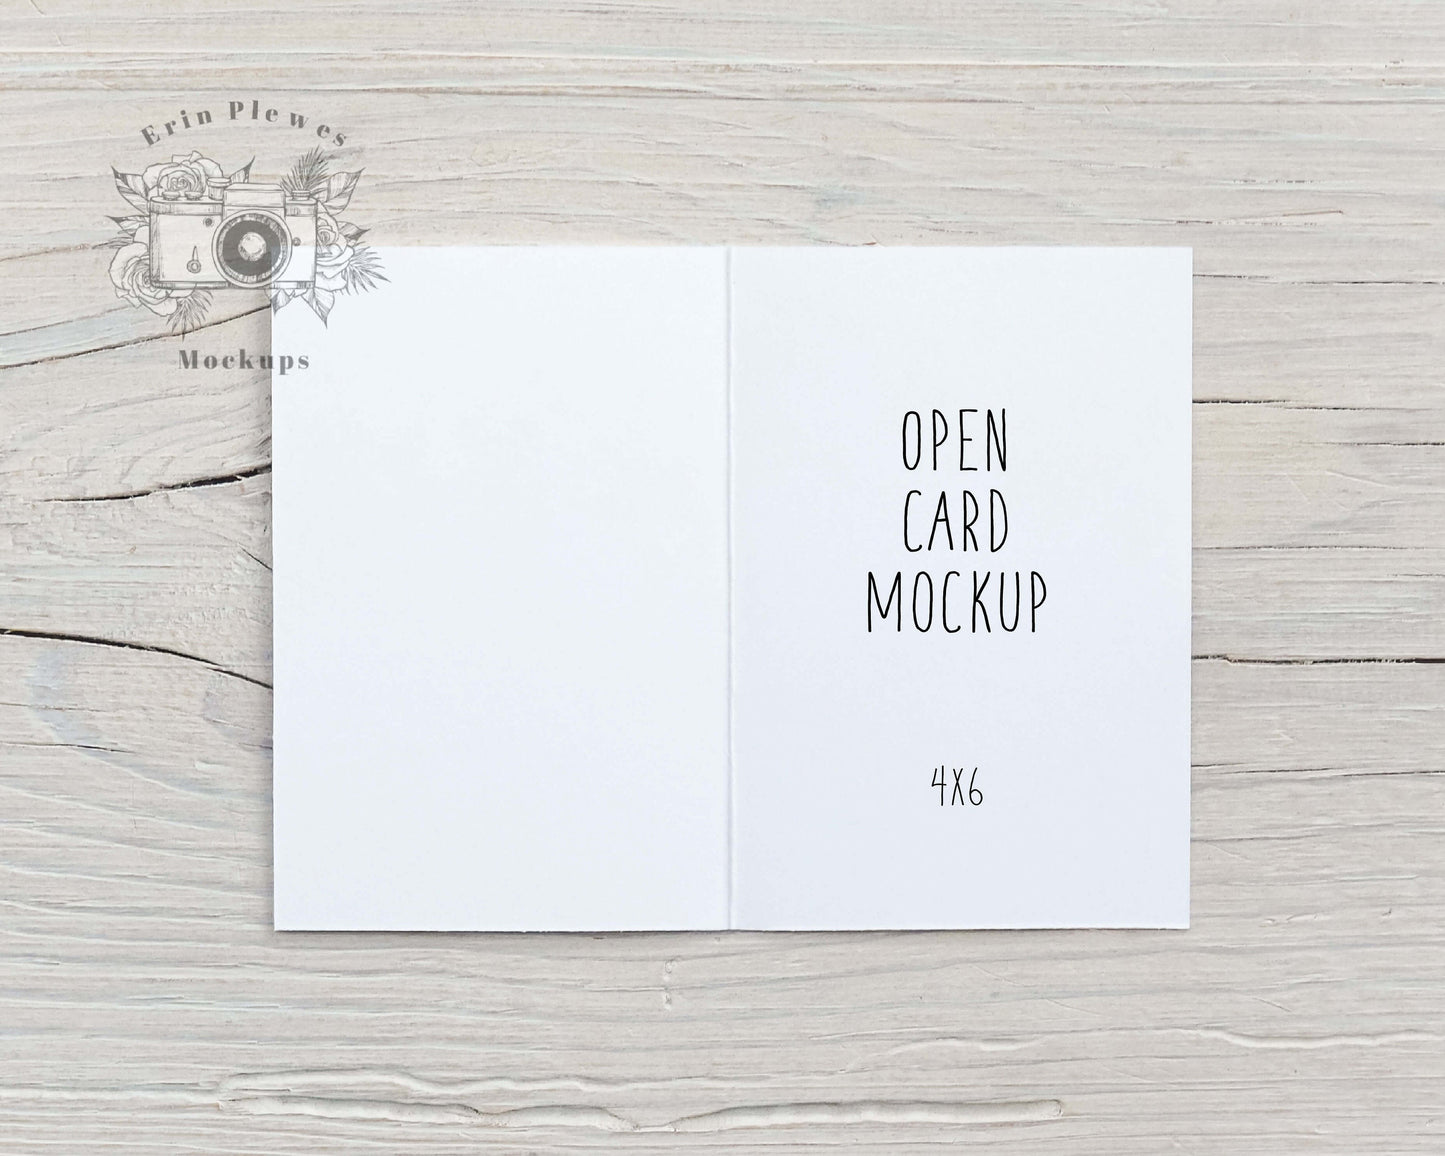 Card Mockup Open, 4x6 Greeting Card Front and Back Mockup for Rustic Wedding, Interior Card Stock Photo, Jpeg Instant Digital Download